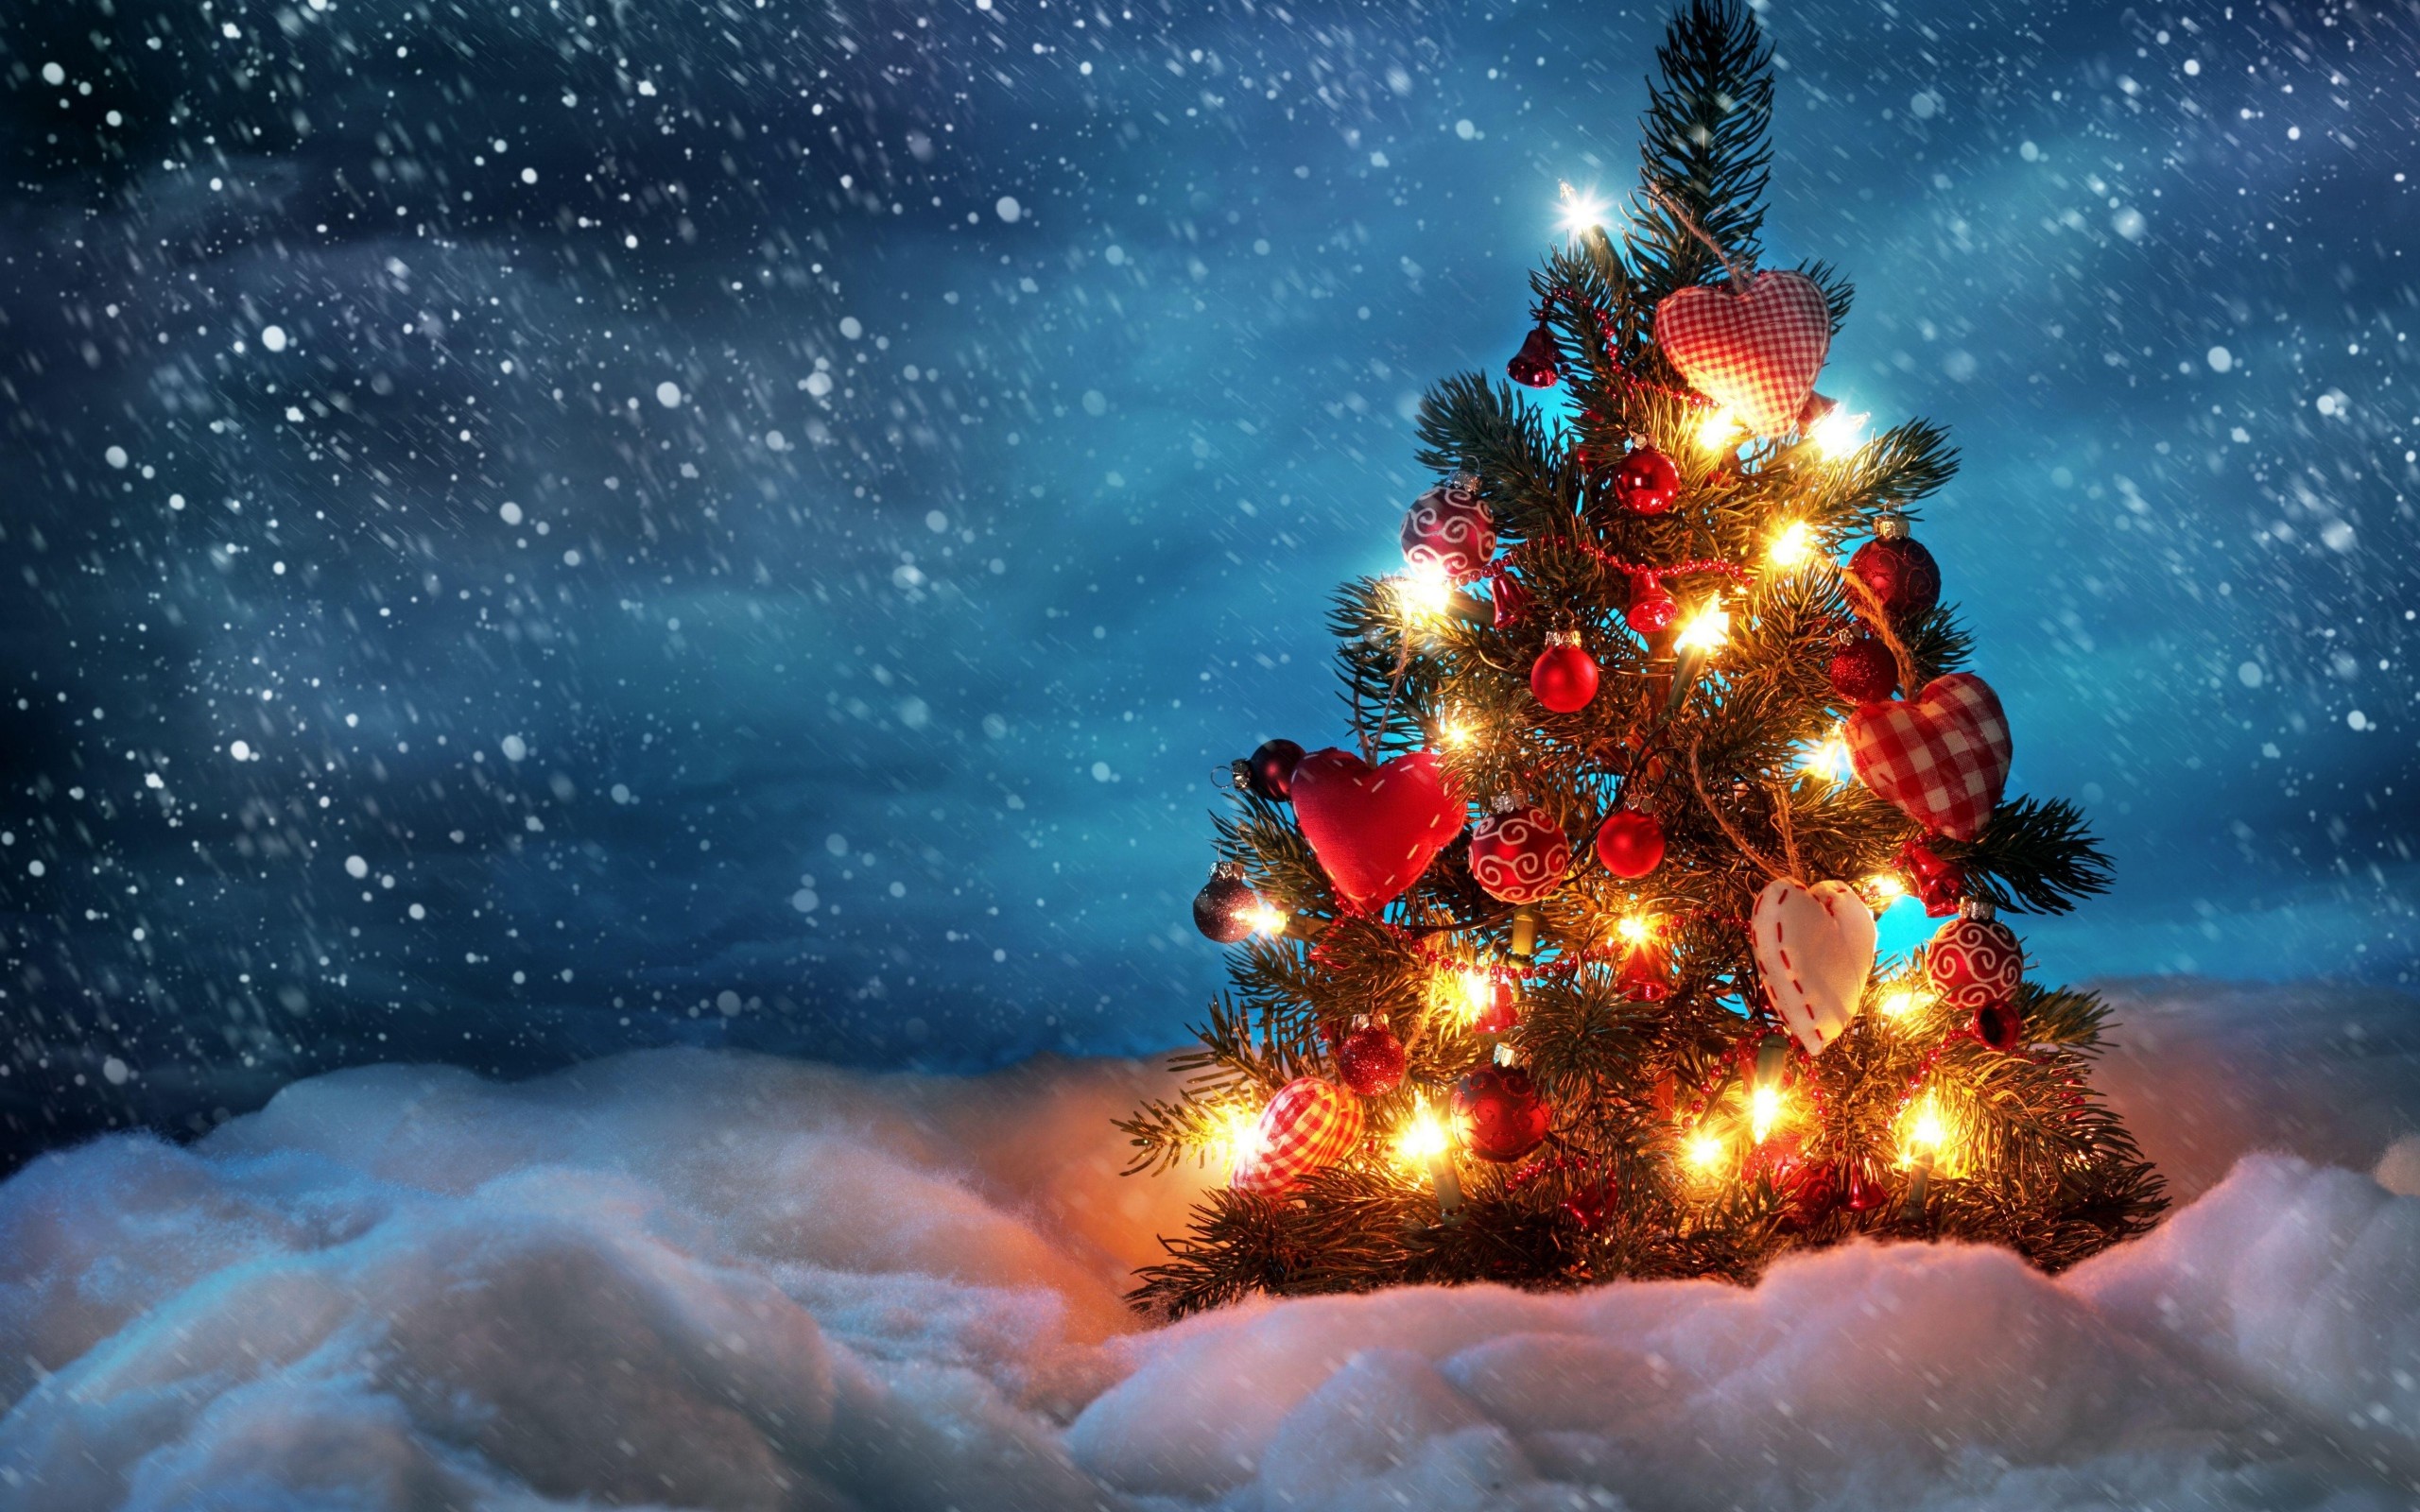 3D Christmas Backgrounds (59+ images)